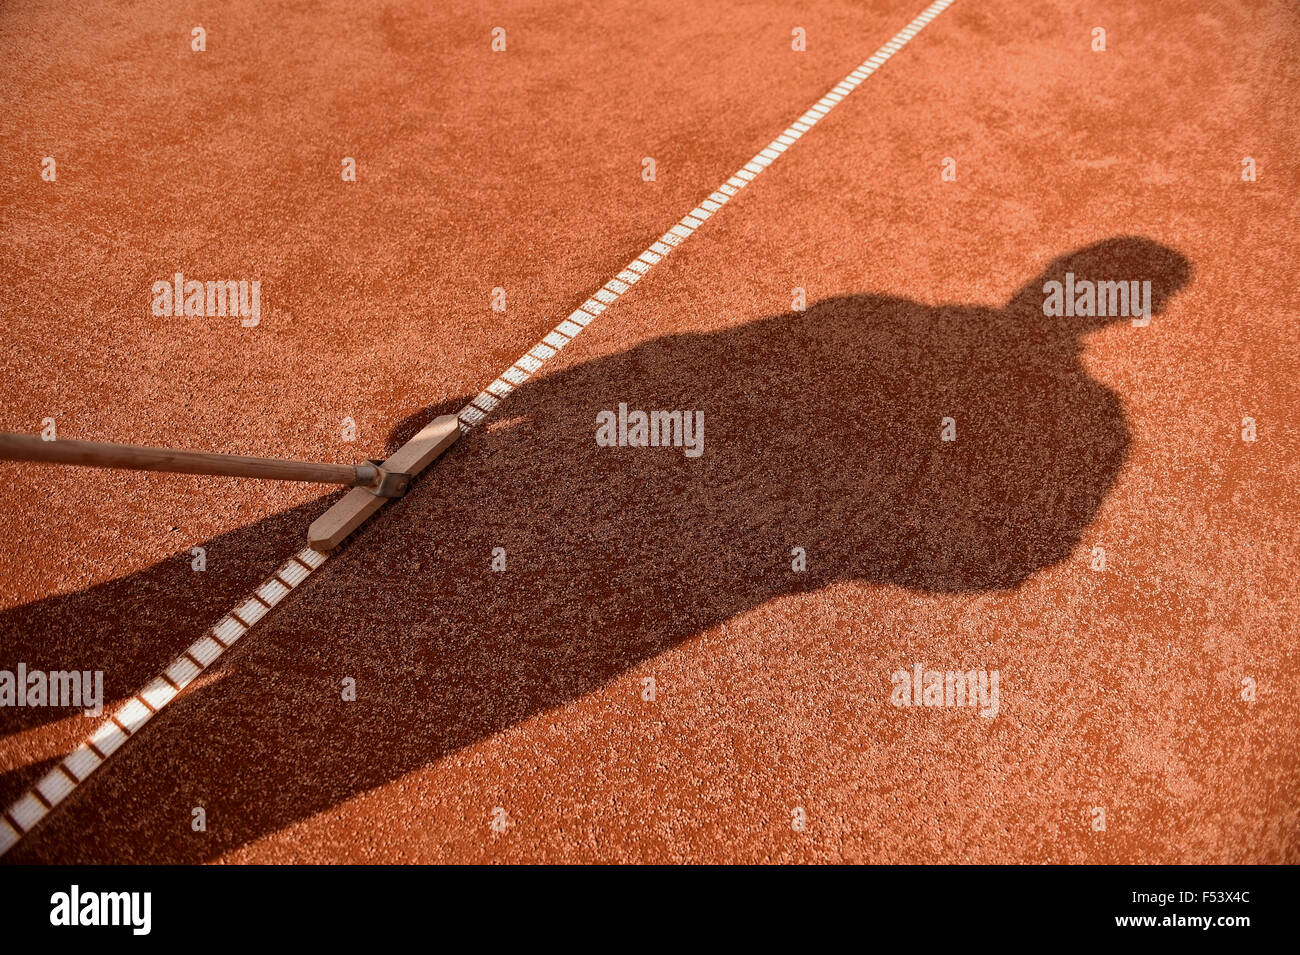 Broom tool for tennis clay court maintenance Stock Photo